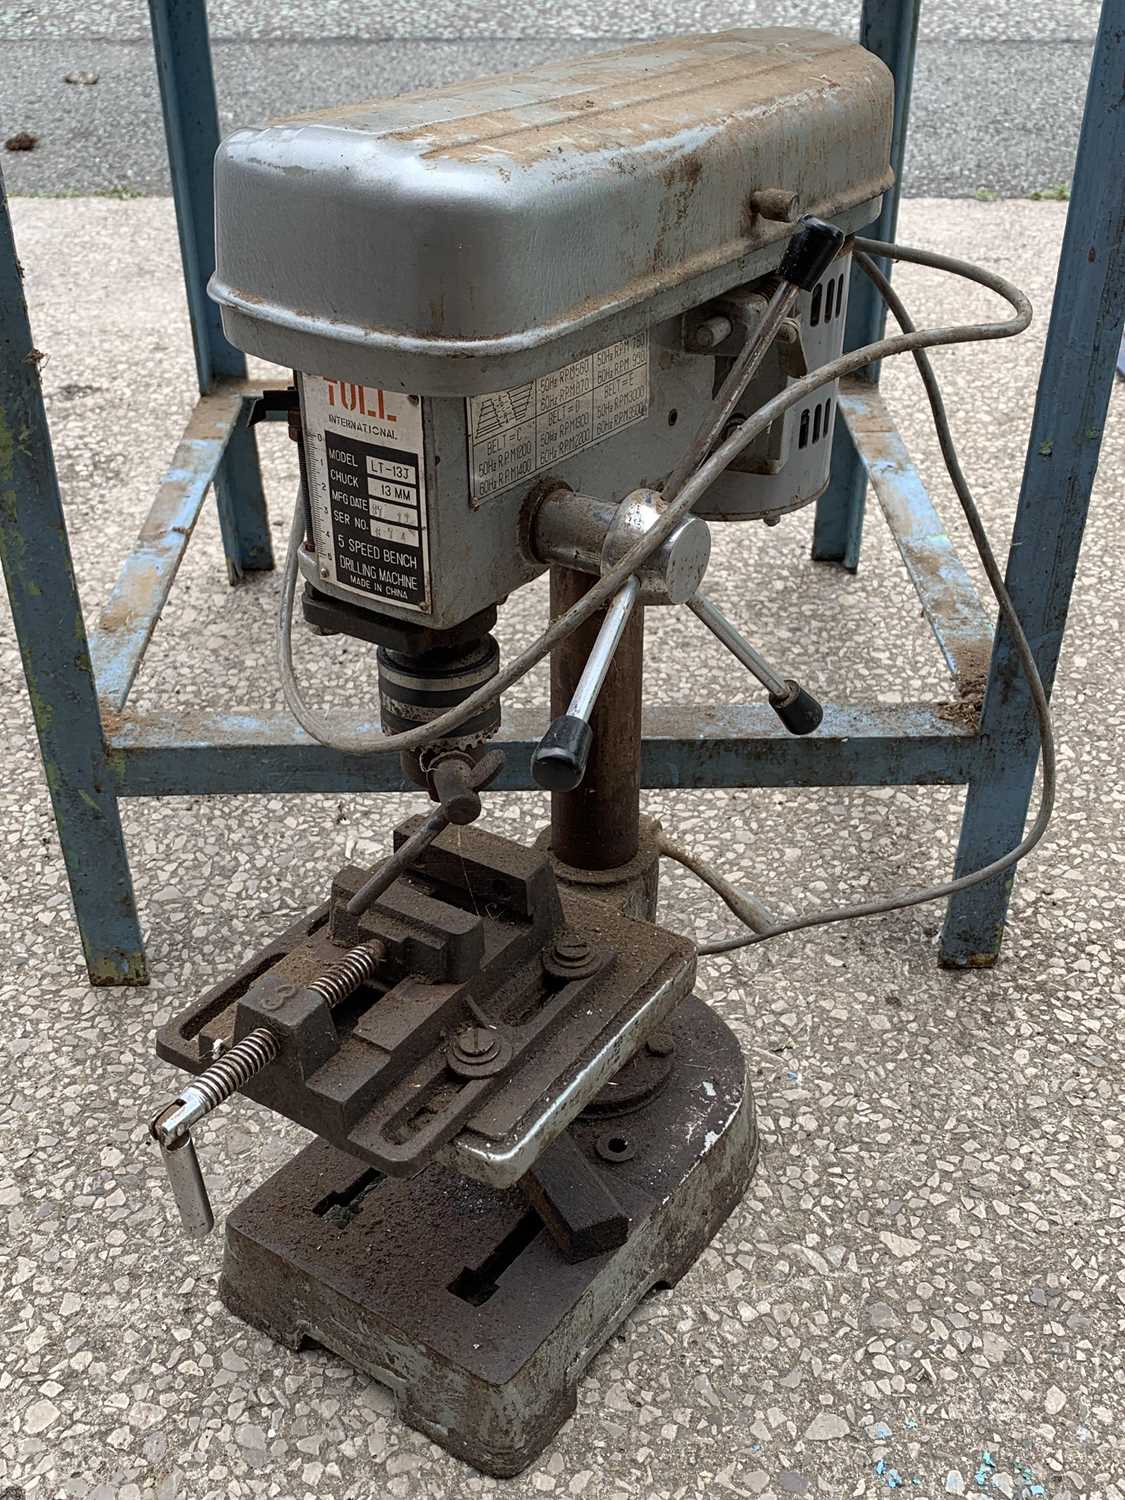 PILLAR DRILL - Tull International LT-13J, a Naerok 16ins scroll saw and a heavy metal work table, - Image 5 of 5